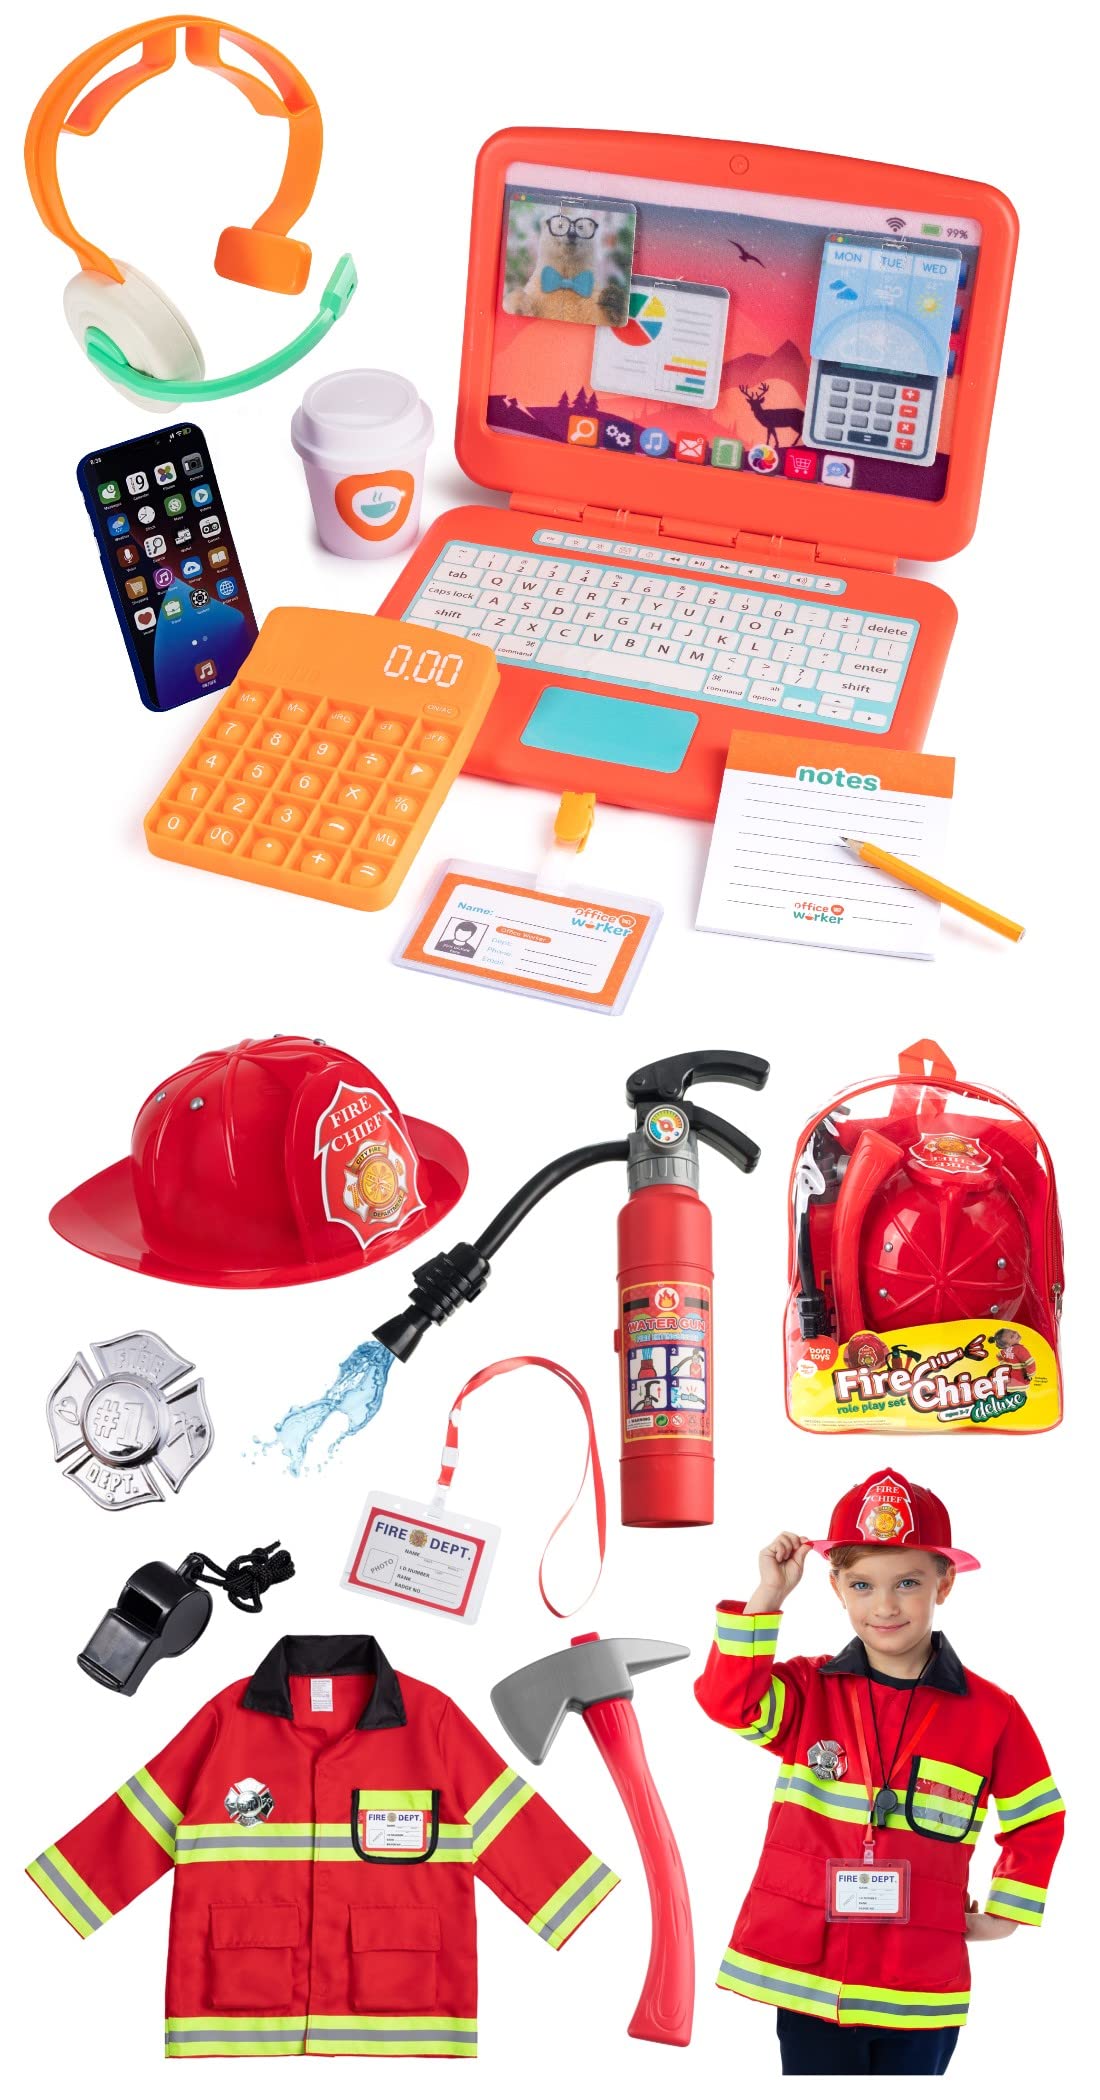 Born Toys Pretend Play Office Set for Toddler and Kids, and Fireman Costume Set for Ages 3-7, Dress up & Pretend Play